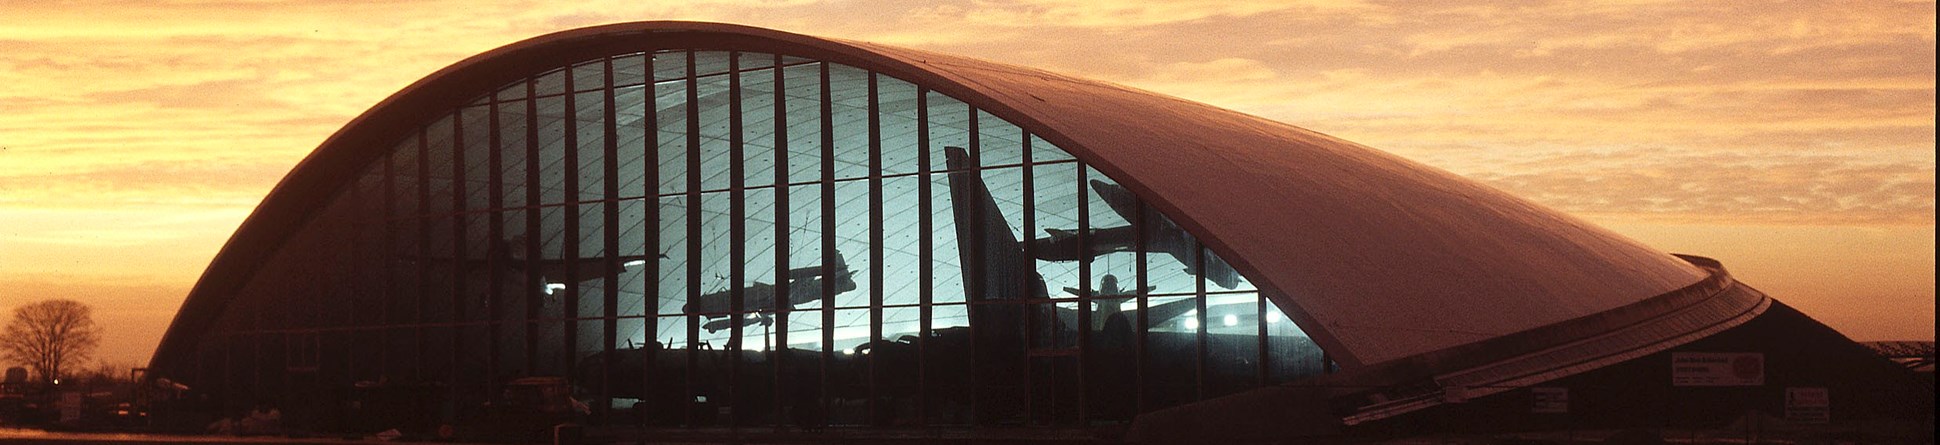 View of hangar at sunset with silhouettes of aircraft inside the building